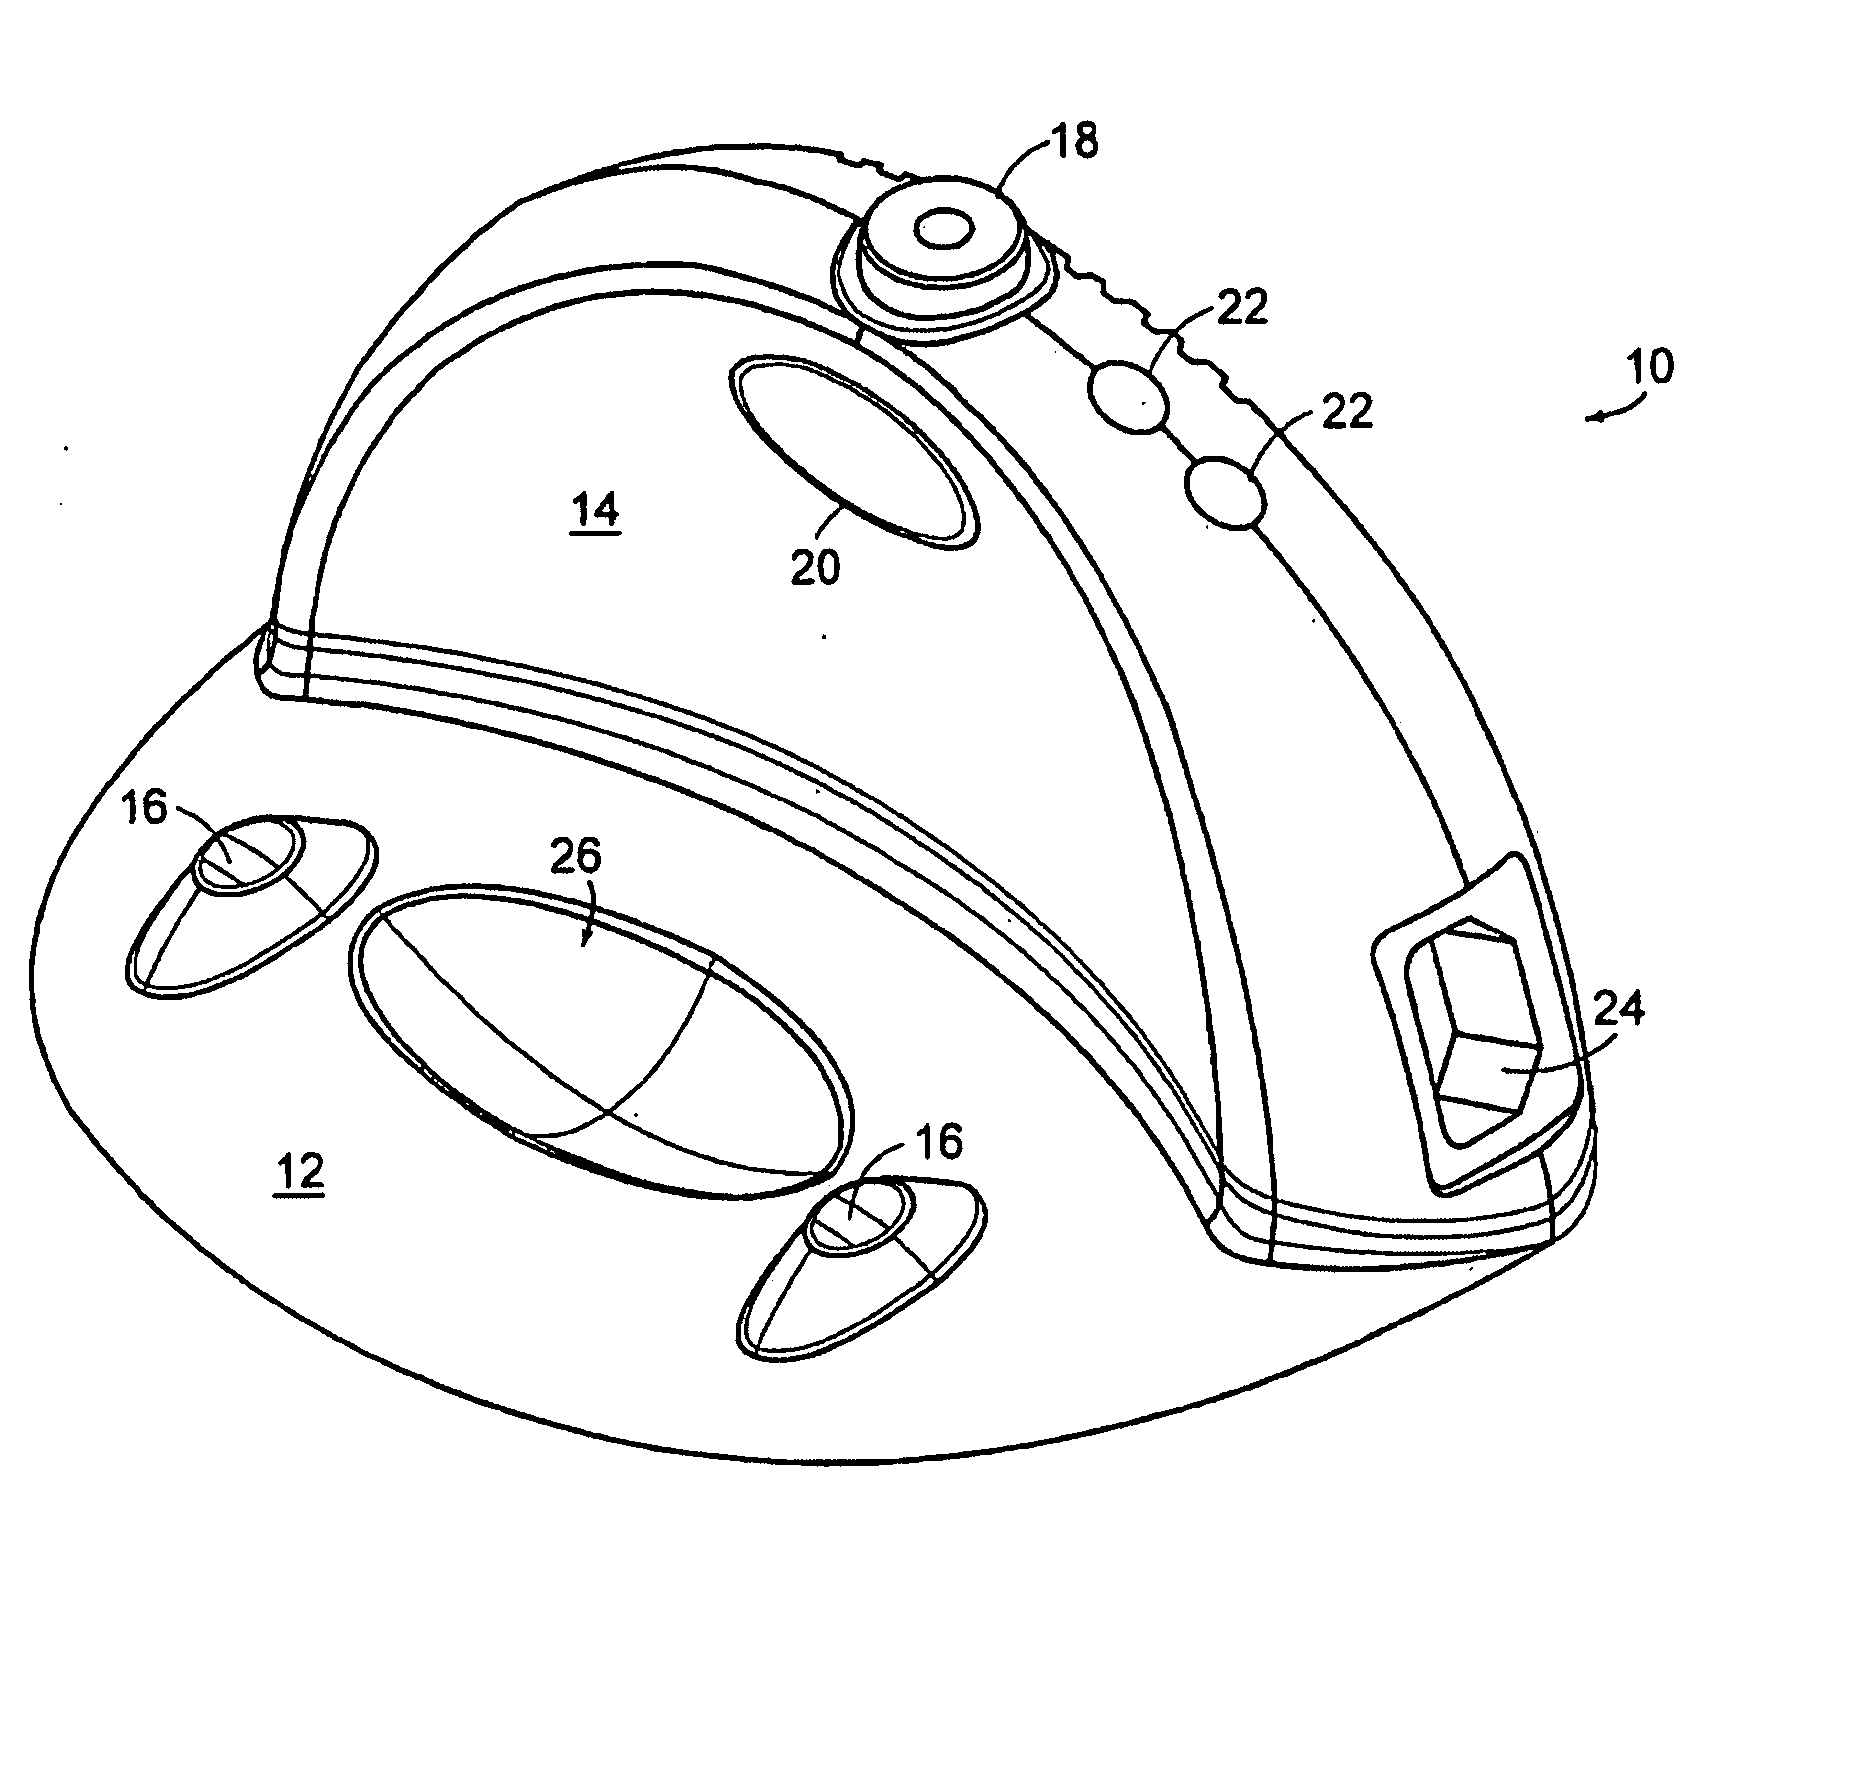 Autonomous Robot Auto-Docking and Energy Management Systems and Methods